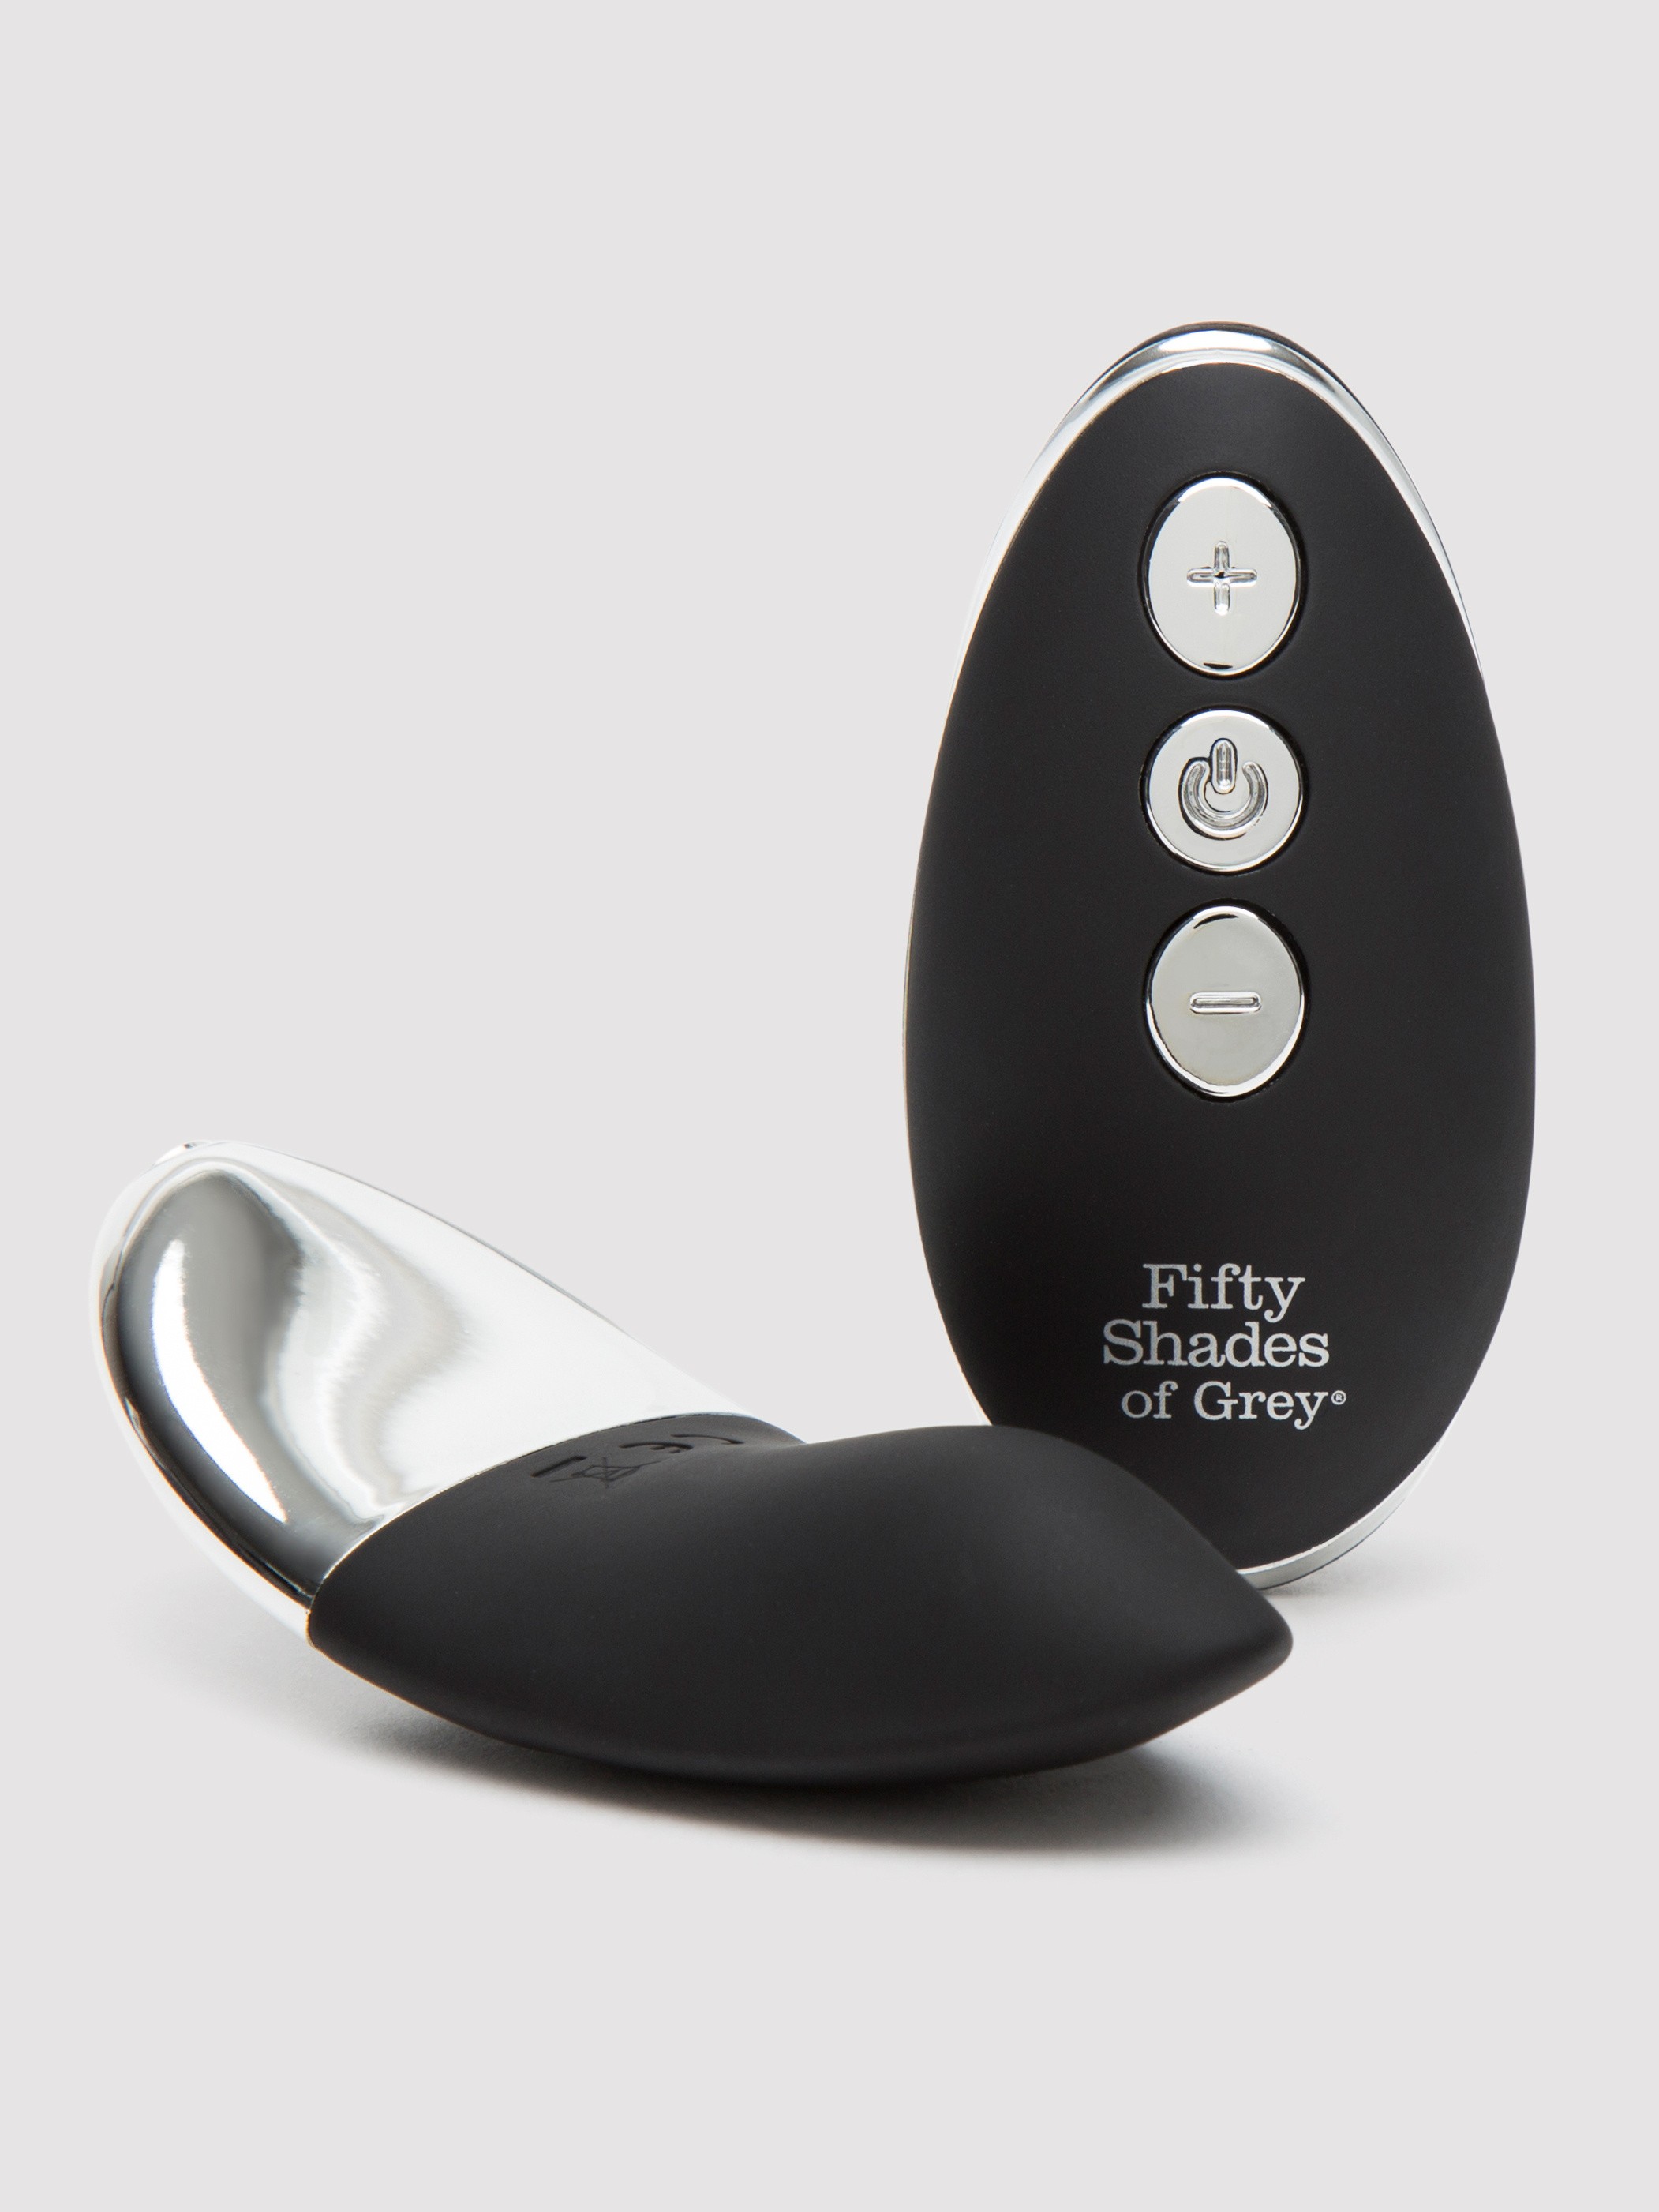 Fifty Shades of Grey Relentless Vibrations Remote Knicker Vibrator  - Black